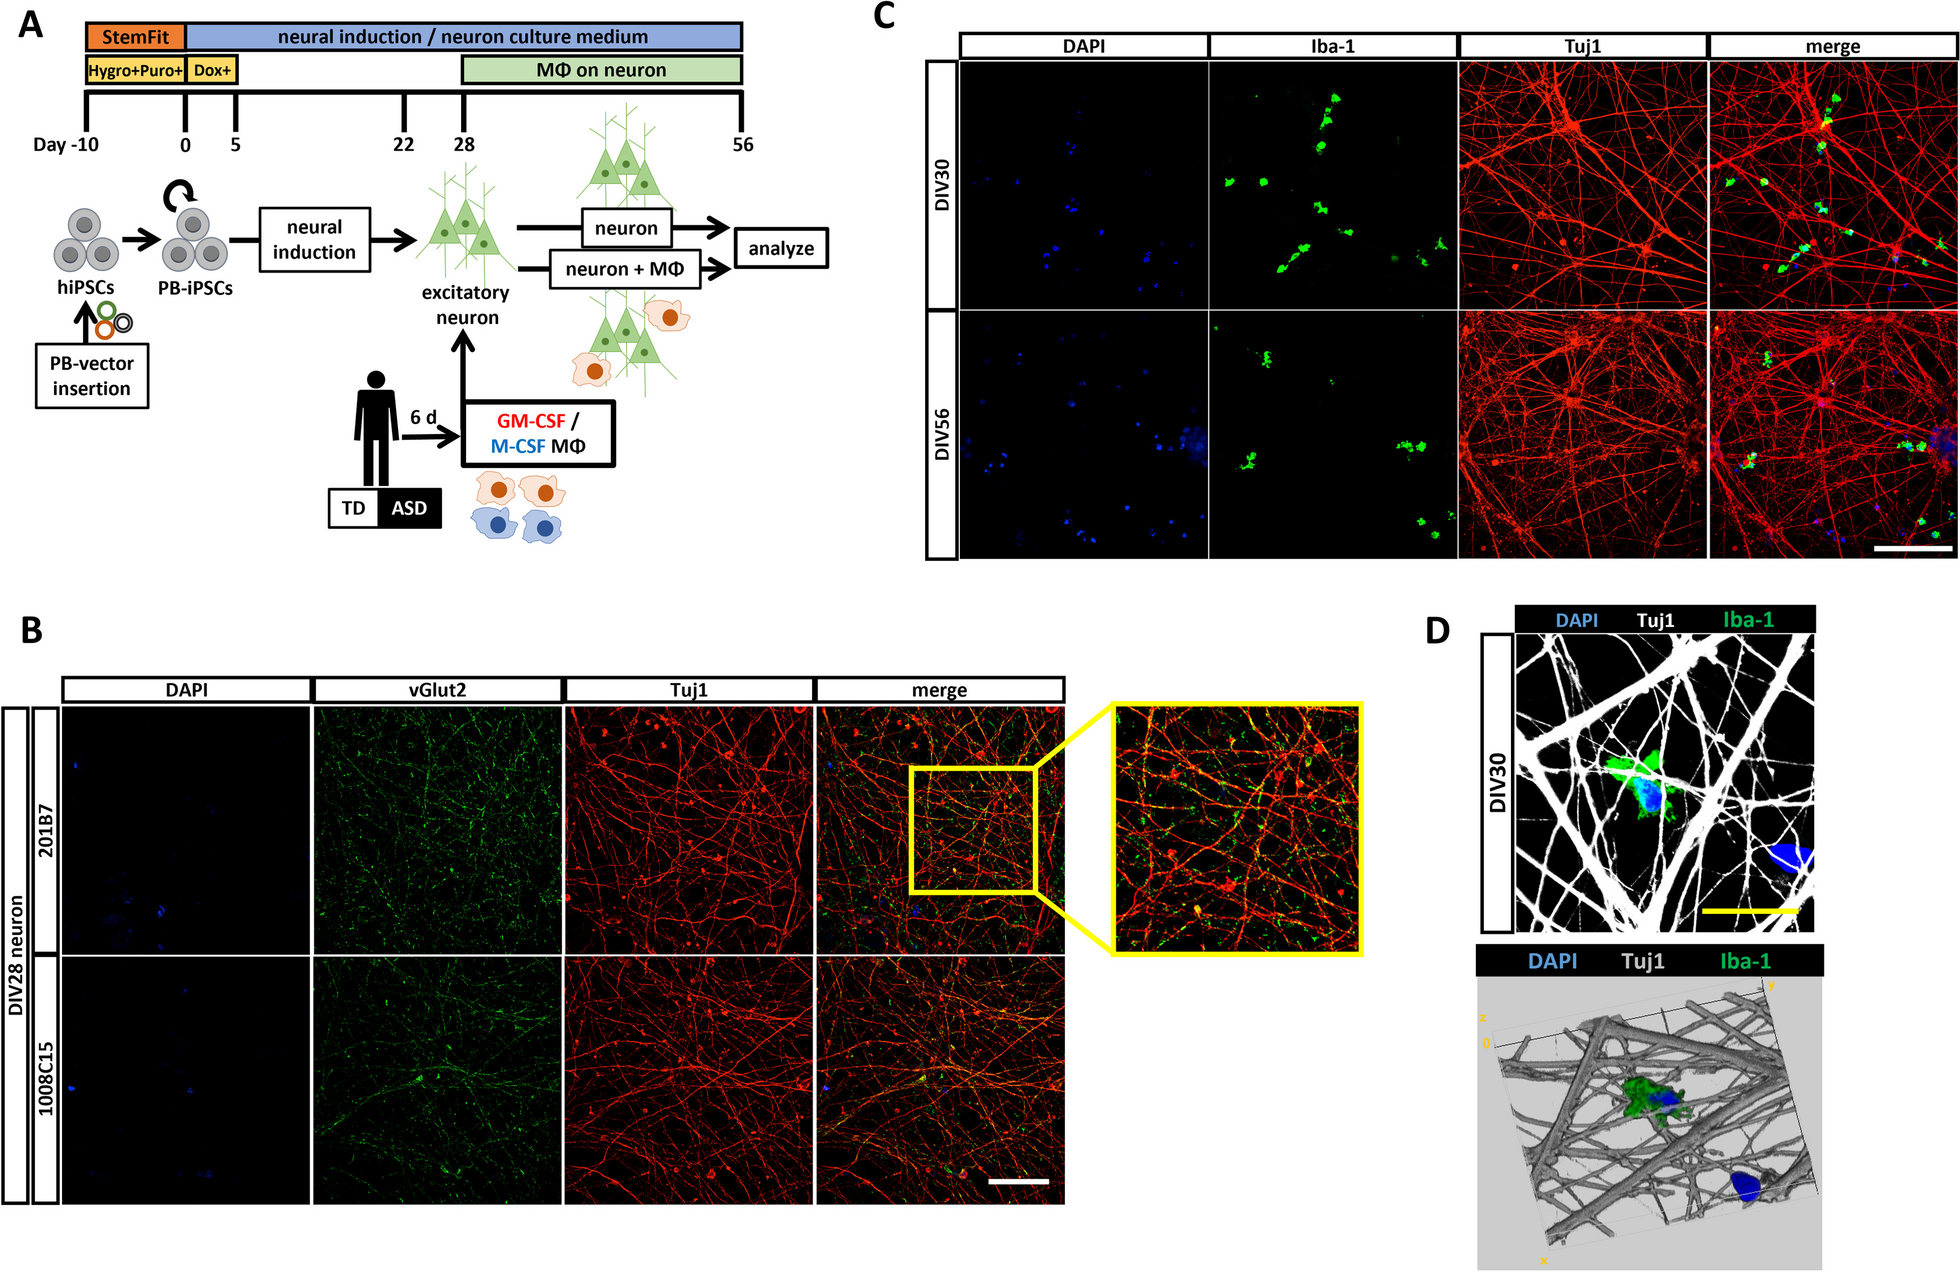 Granulocyte macrophage colony-stimulating factor-induced macrophages of individuals with autism spectrum disorder adversely affect neuronal dendrites through the secretion of pro-inflammatory cytokines